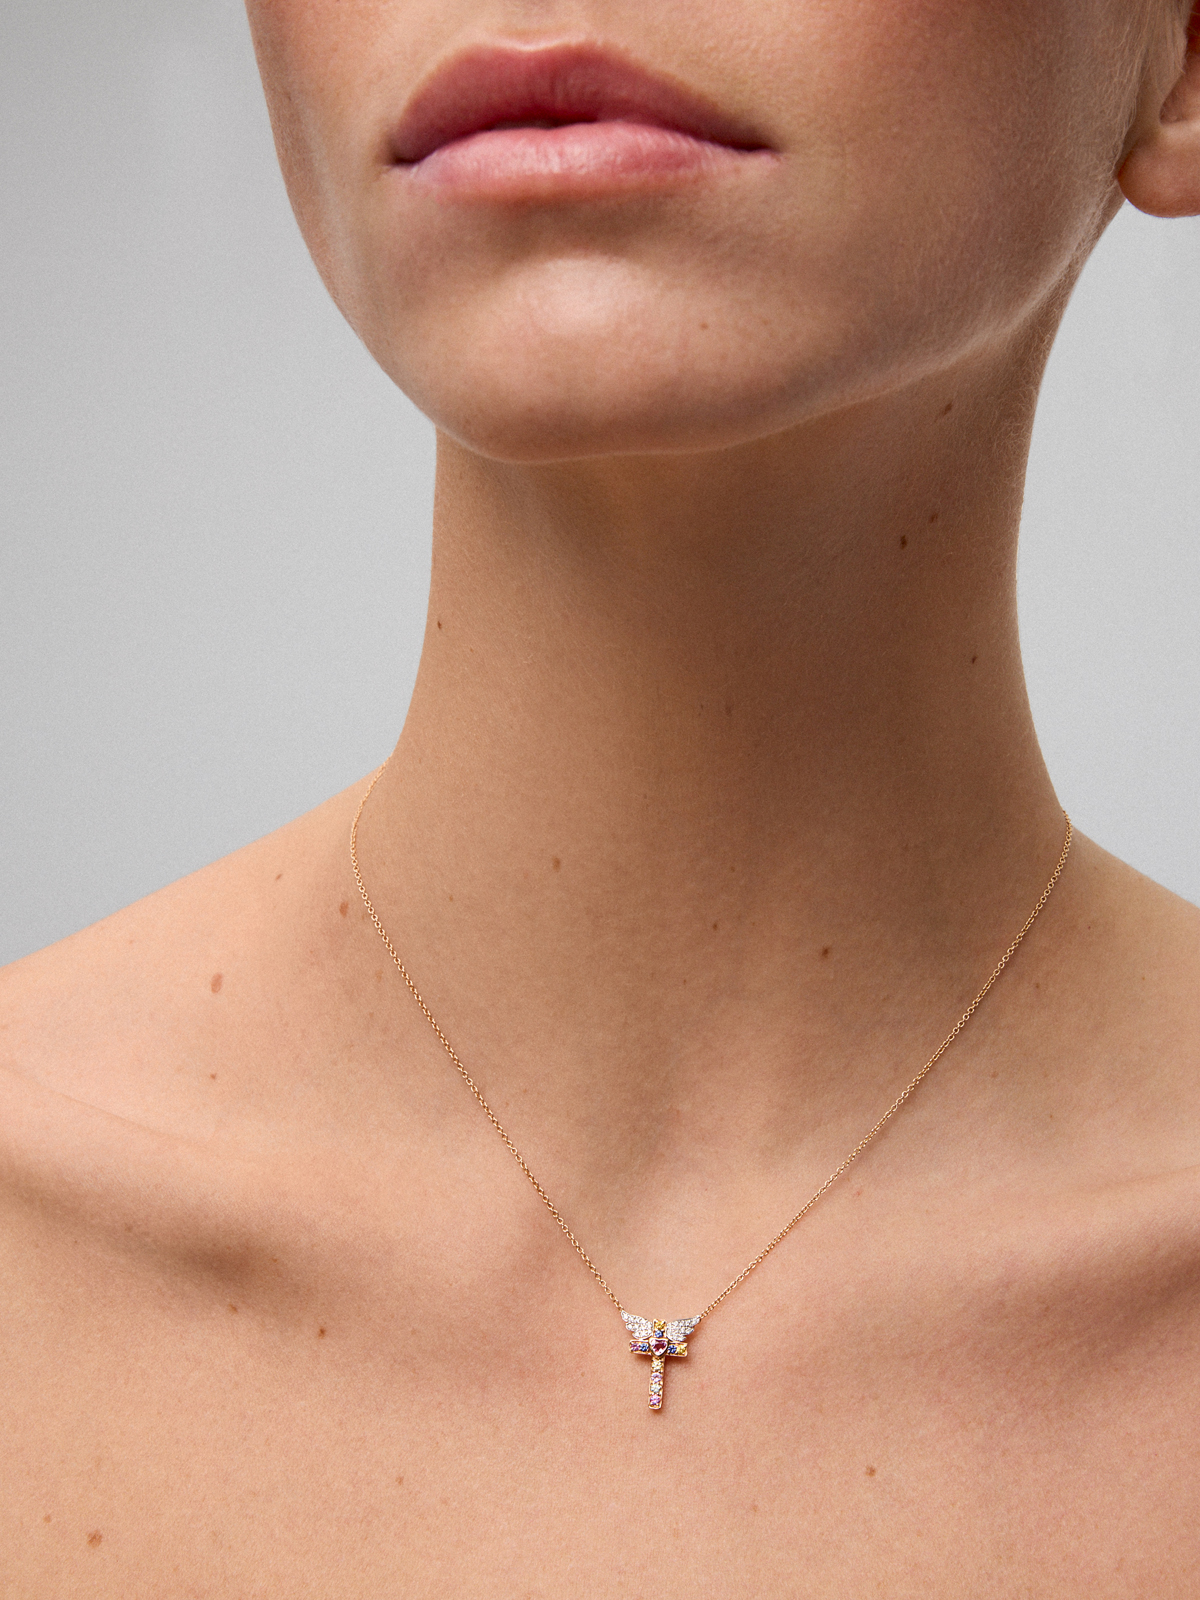 18K Rose Gold Cross Pendant Chain with Sapphire and Diamond.